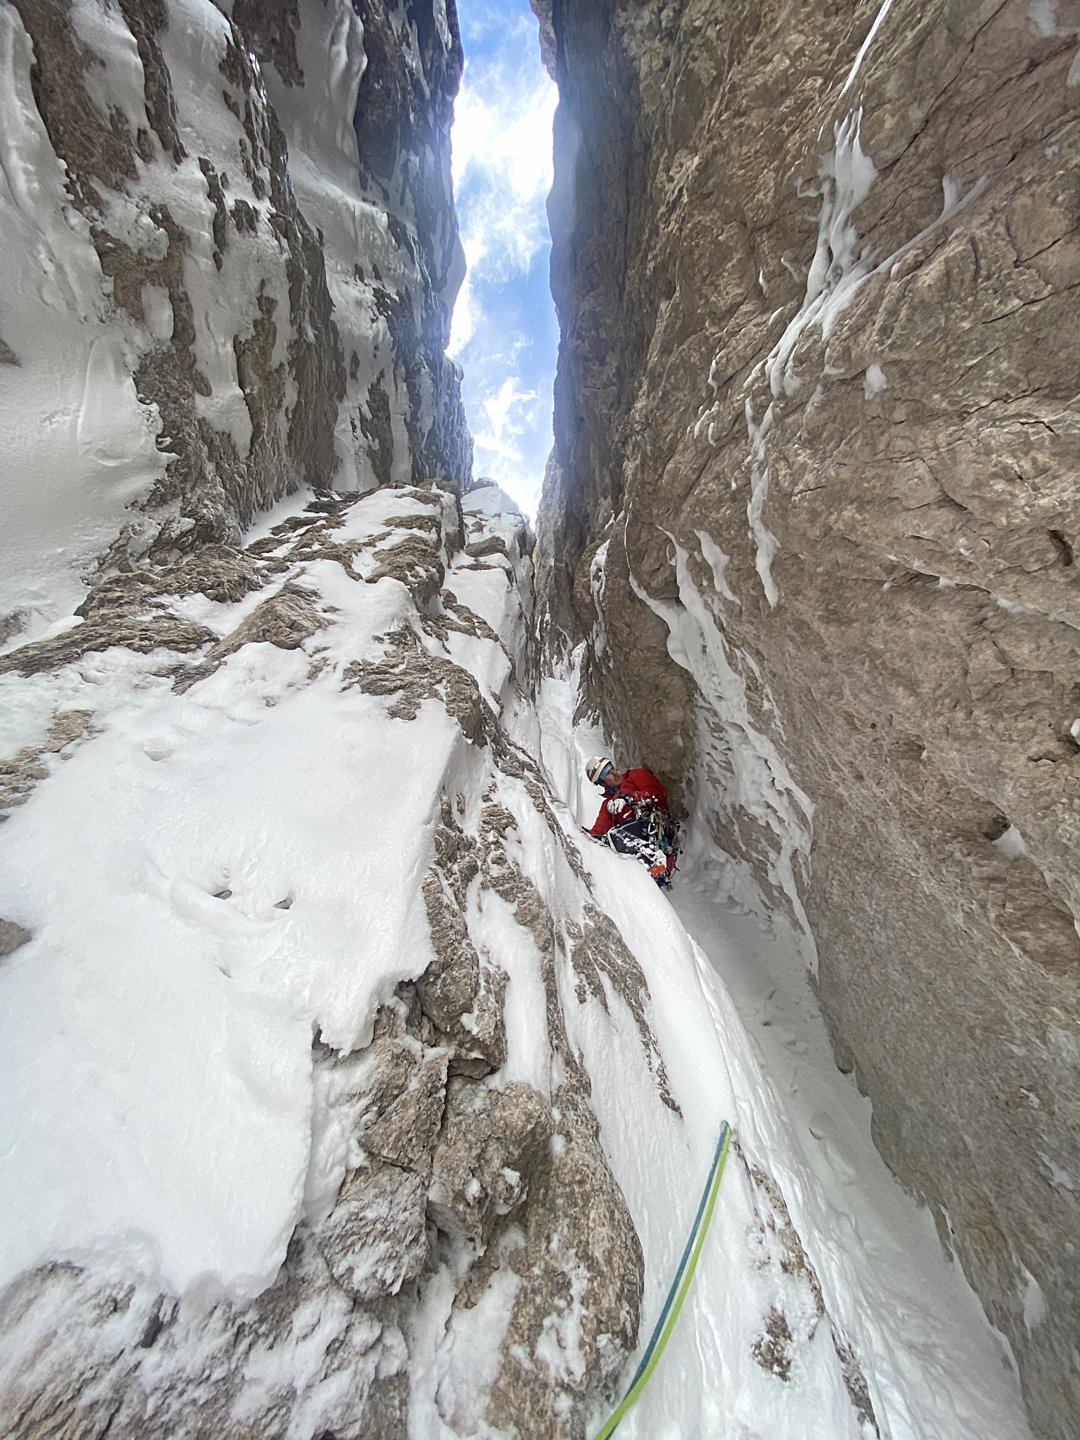  Pazzione Primavernale, a 1,000-meter new route on Cima Tosa in the Dolomites, Italy. 